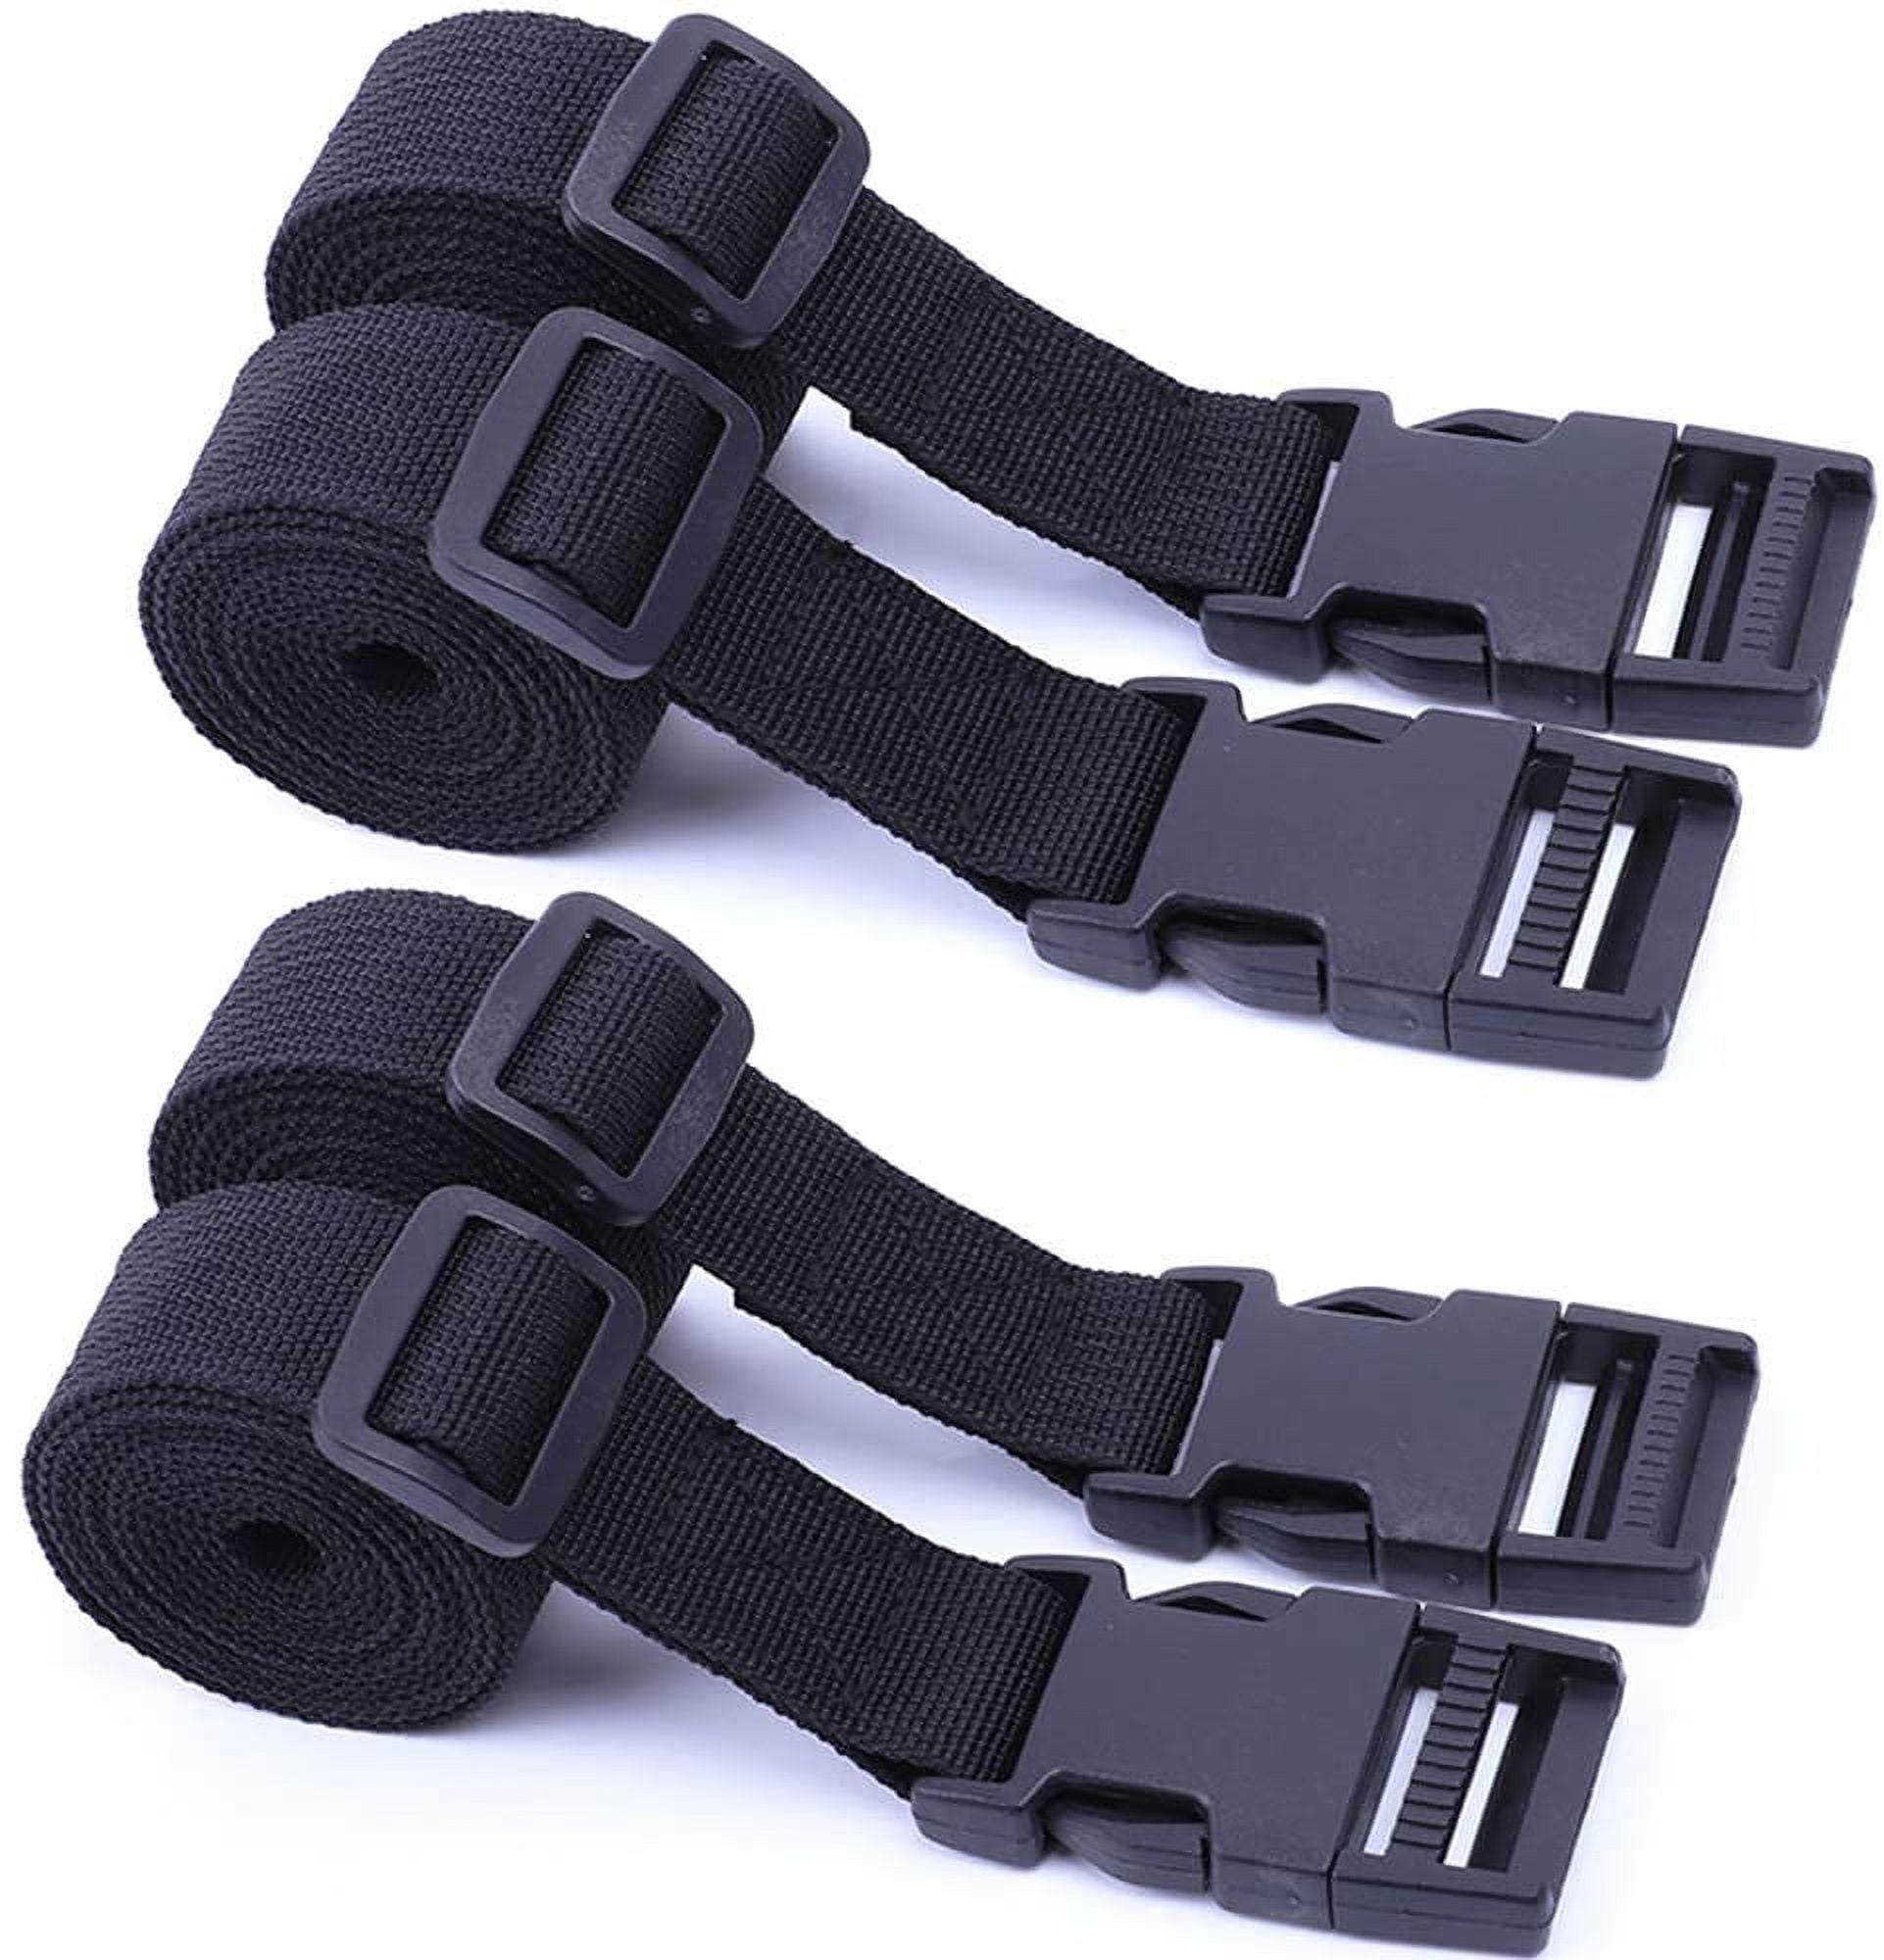  TOVOT 4PCS 70 Buckle Straps Nylon Straps 1 Inch Wide with  Buckles Adjustable Straps 1 Inch Webbing Straps for Luggage Straps Pet  Collar Backpack Repairing : Arts, Crafts & Sewing